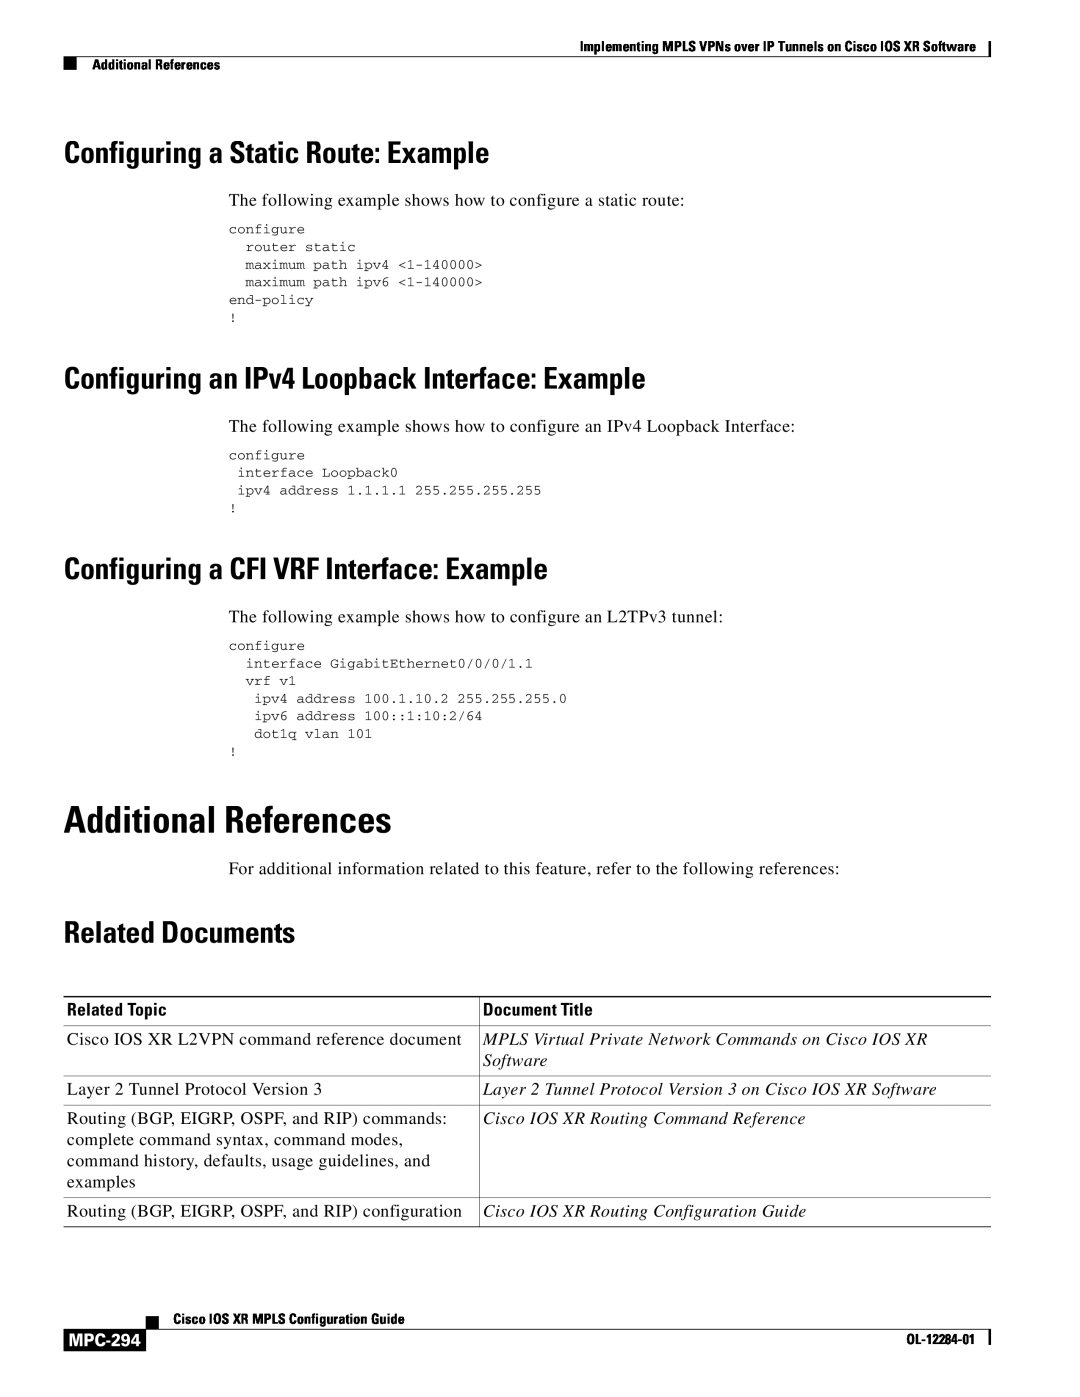 Cisco Systems MPC-273 Additional References, Configuring a Static Route Example, Configuring a CFI VRF Interface Example 